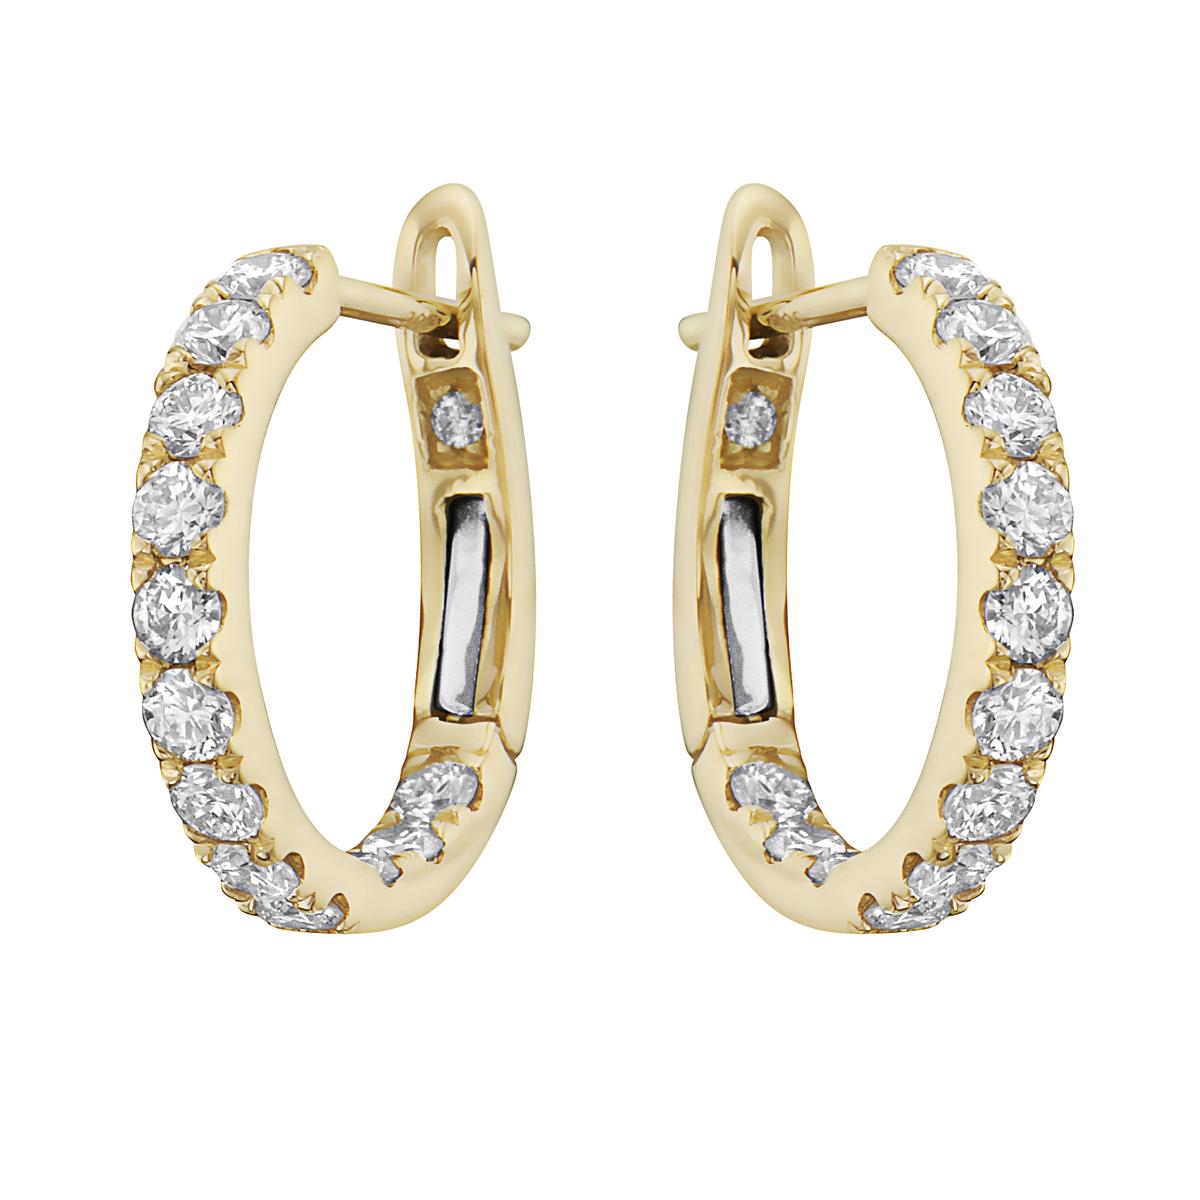 With these exquisite diamond earrings, style and glamour are in the spotlight. These yellow gold hoop earrings are set in 14-karat gold and made from 2.4 grams of gold. The color of the diamonds is GH. The clarity is SI1. This piece is made out of